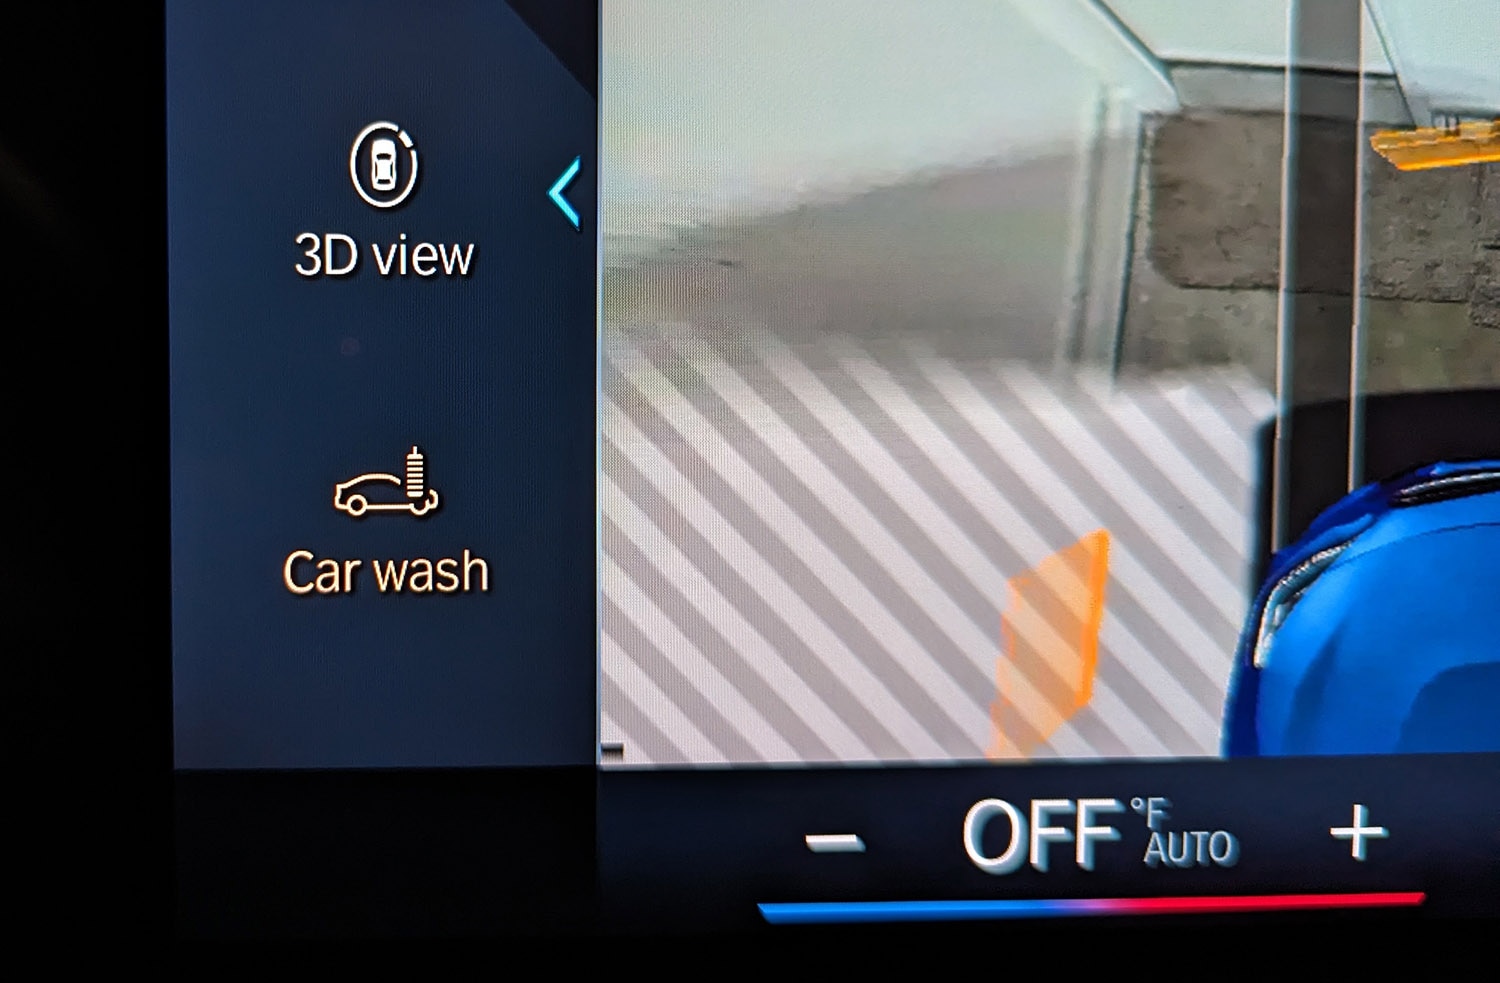 Vehicle infotainment screen with car wash mode feature